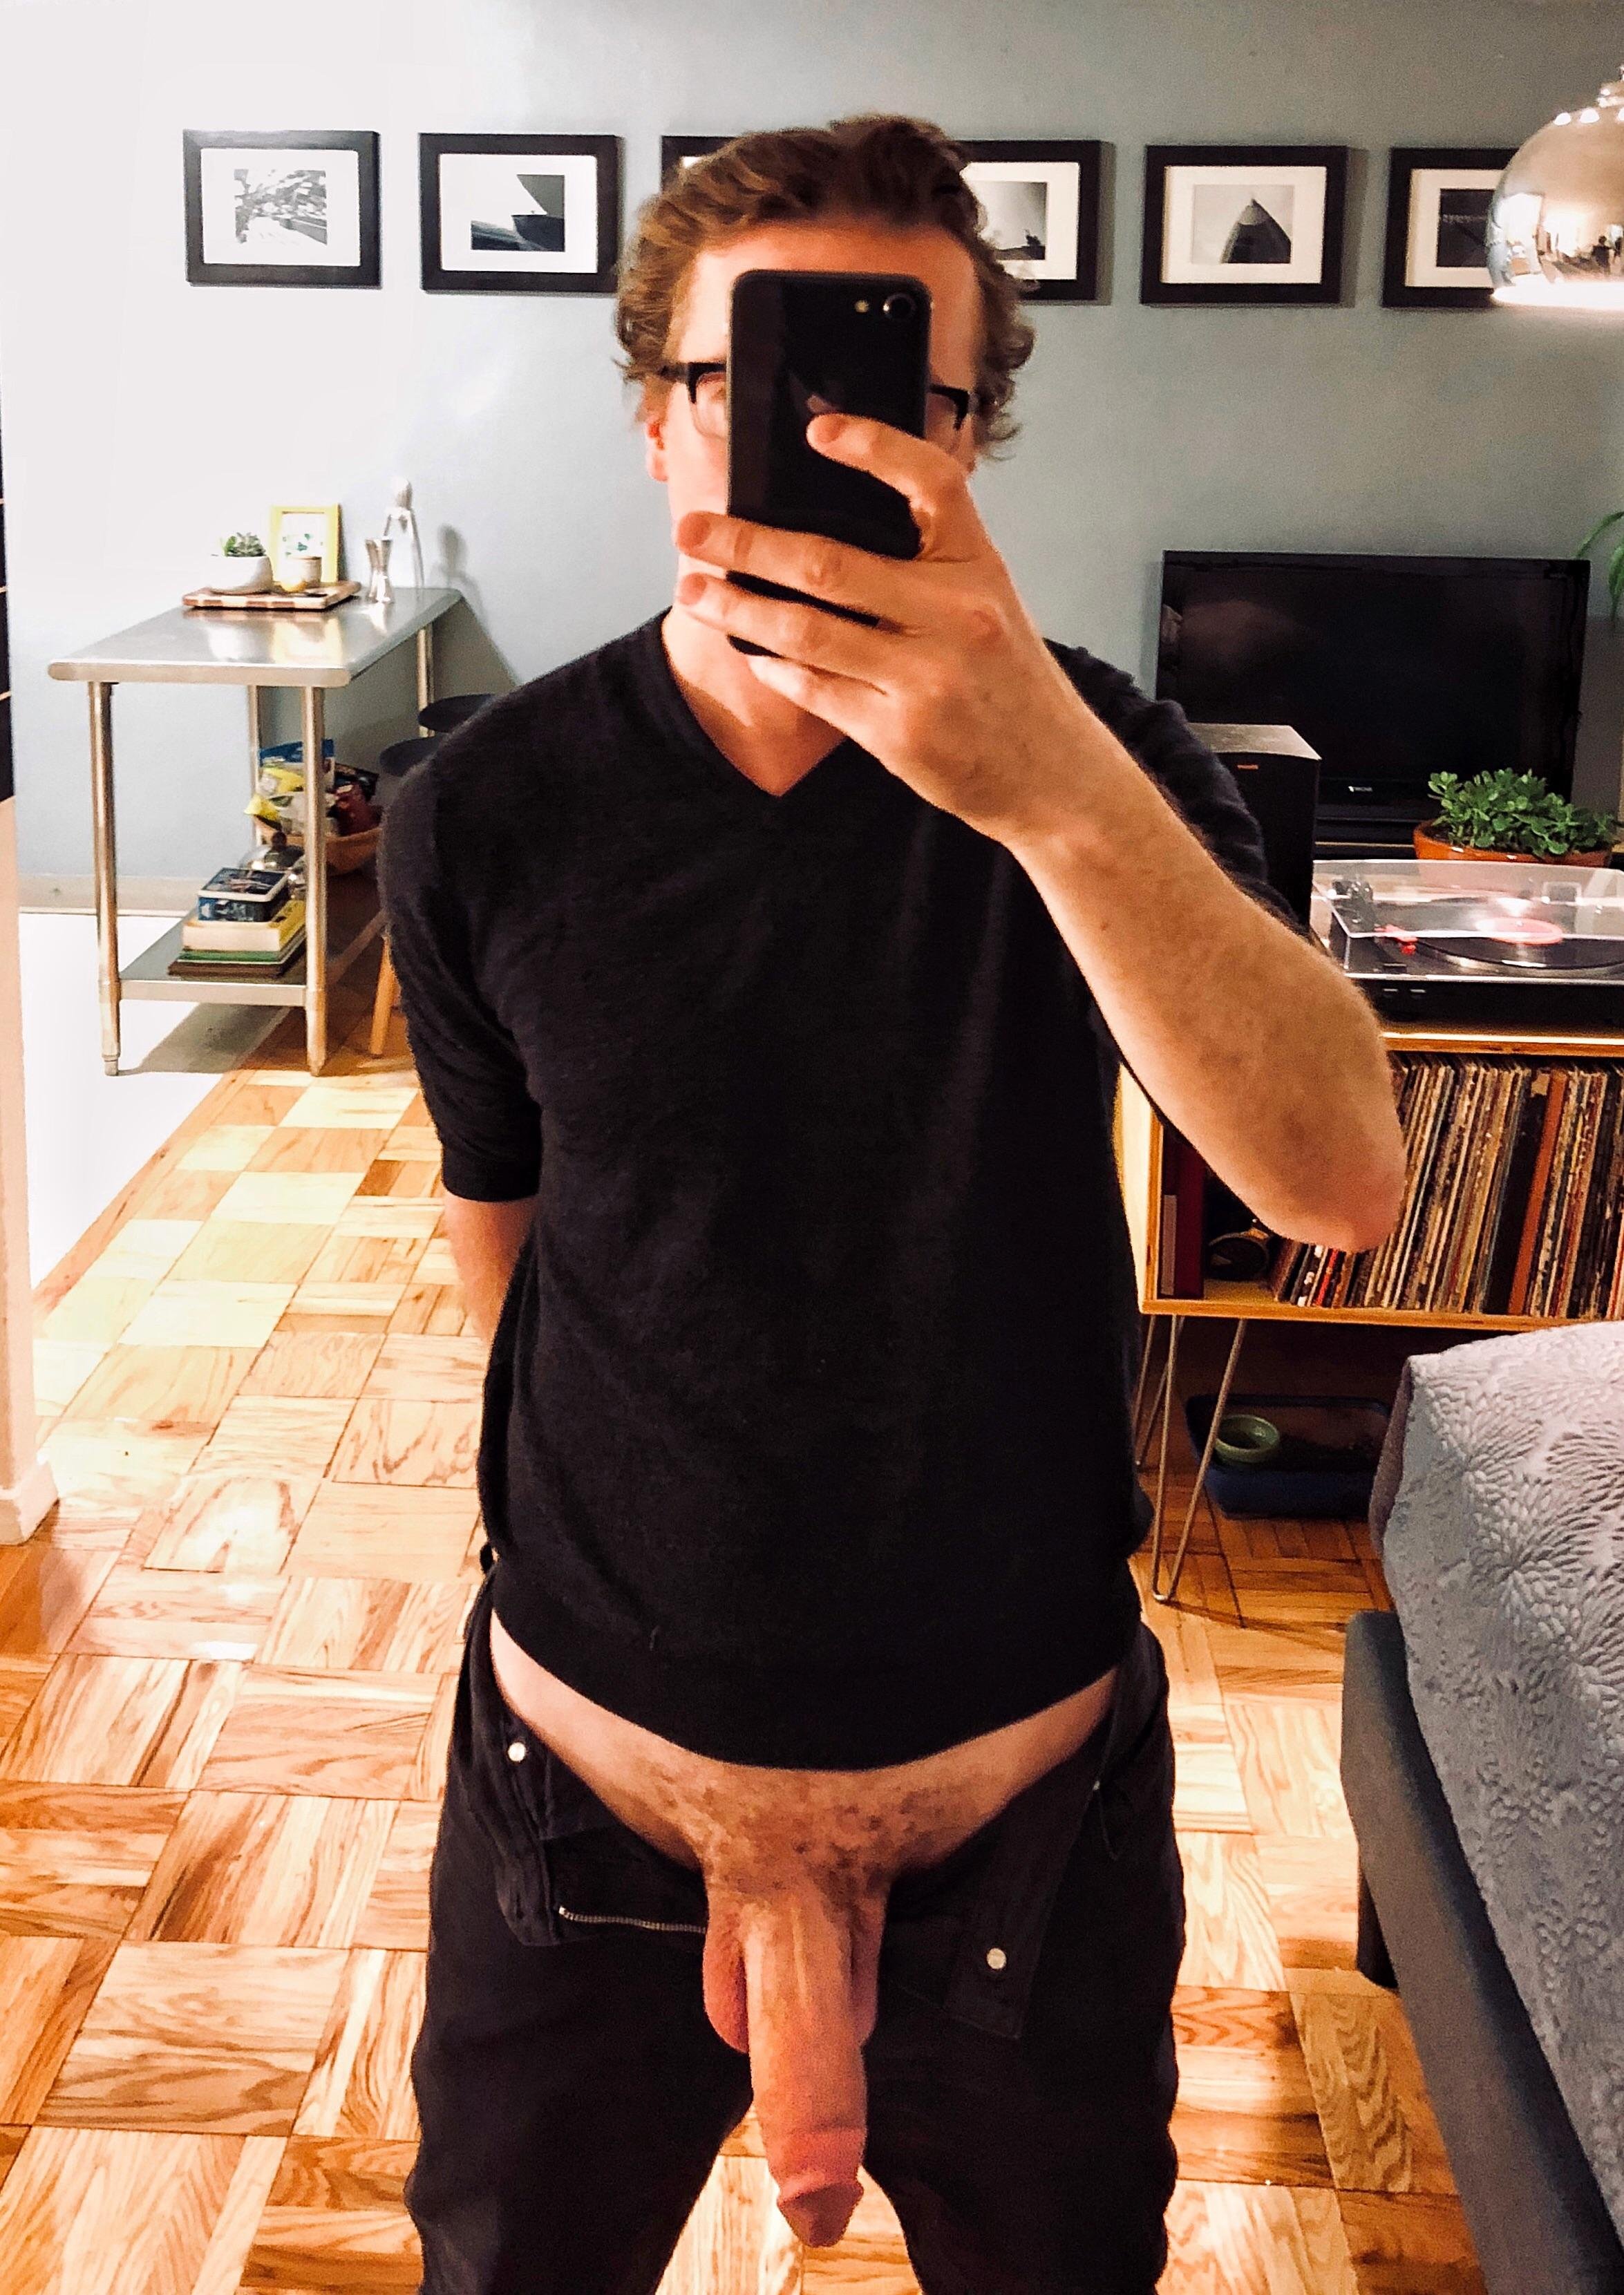 Skinny jeans are a real bitch, but feeling relief now. PMs welcome.